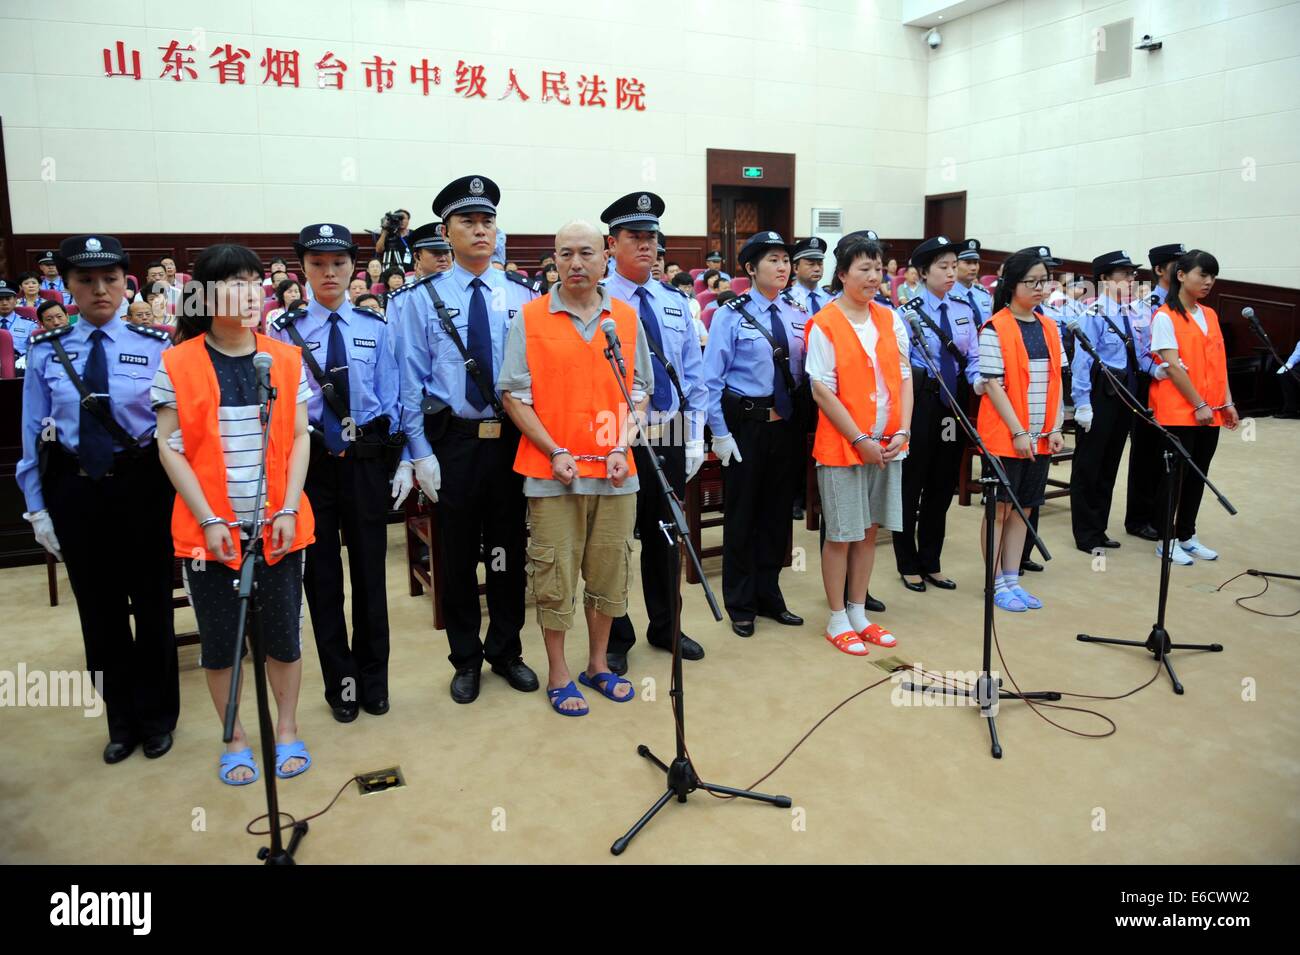 Yantai. 21st Aug, 2014. Five cult members Zhang Fan, Zhang Lidong, Lyu Yingchun, Zhang Hang and Zhang Qiaolian stand trial on murder charges in Yantai Intermediate People's Court in Yantai City, east China's Shandong Province, Aug. 21, 2014. A woman surnamed Wu was beaten to death on May 28 at a McDonald's outlet in Zhaoyuan City, Yantai, after she refused to give her telephone number to the suspects, who were allegedly trying to recruit new members for their cult Quannengshen, which means 'almighty god.' Credit:  Xinhua/Alamy Live News Stock Photo